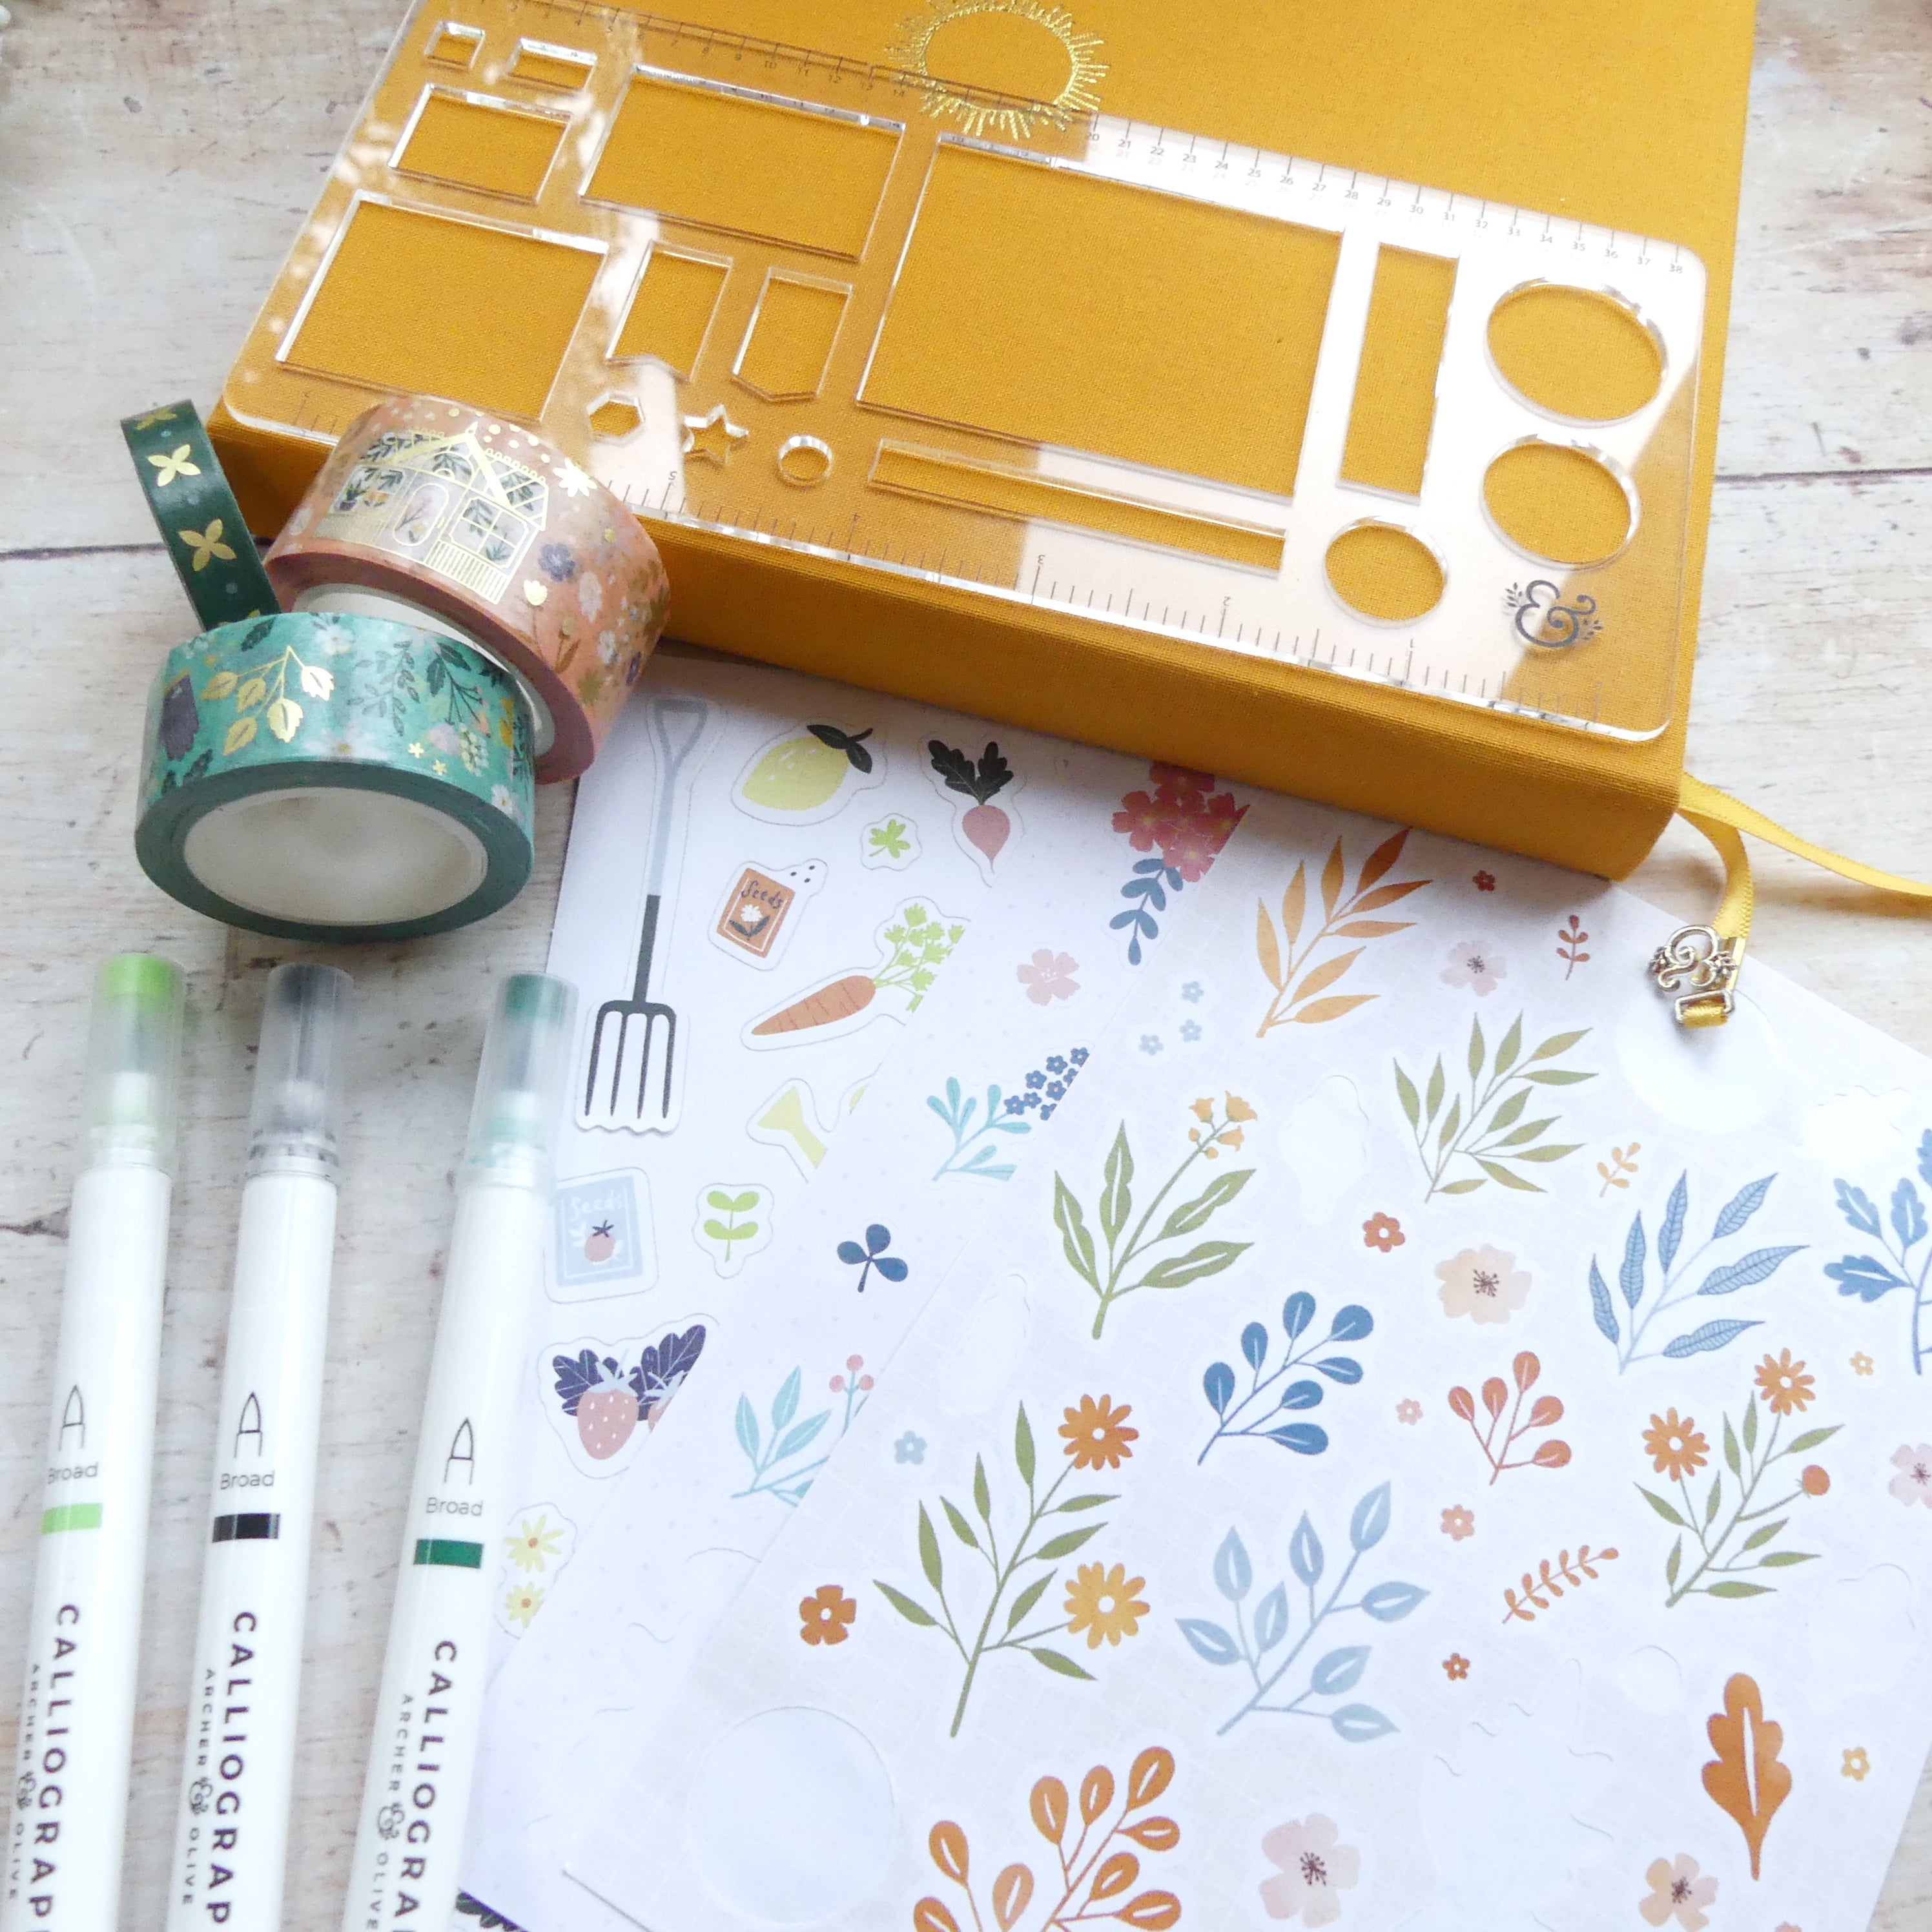 Closed journal with garden theme accessories